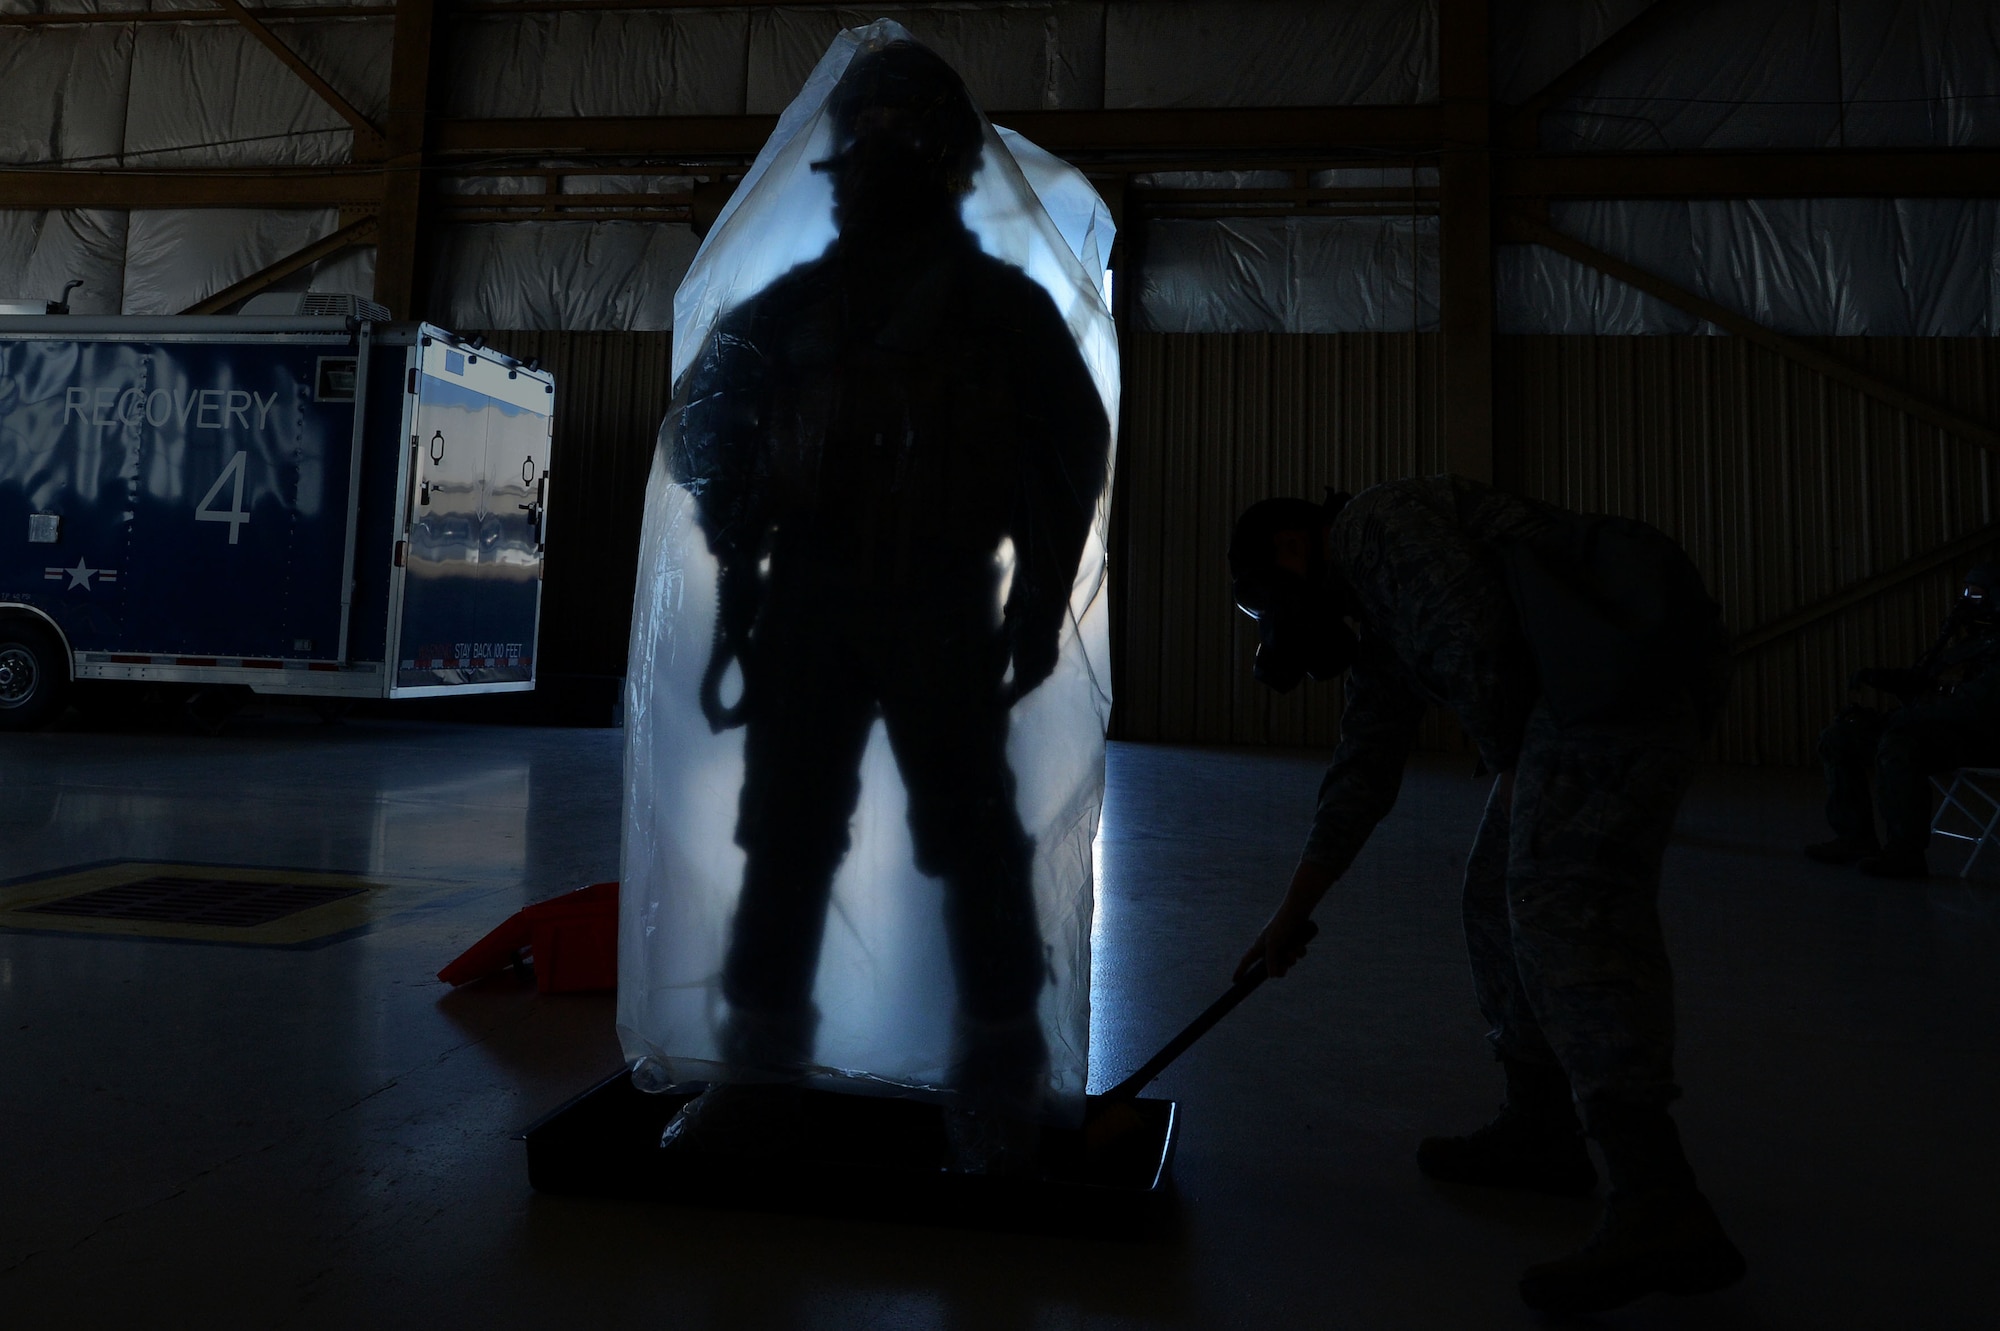 A U.S. Air Force pilot is scrubbed down during decontamination training at Shaw Air Force Base, S.C., Oct. 23, 2015. Aircrew flight equipment Airmen are in charge of making sure a pilot is properly decontaminated in the event of in-flight contamination. (U.S. Air Force photo by Senior Airman Michael Cossaboom)